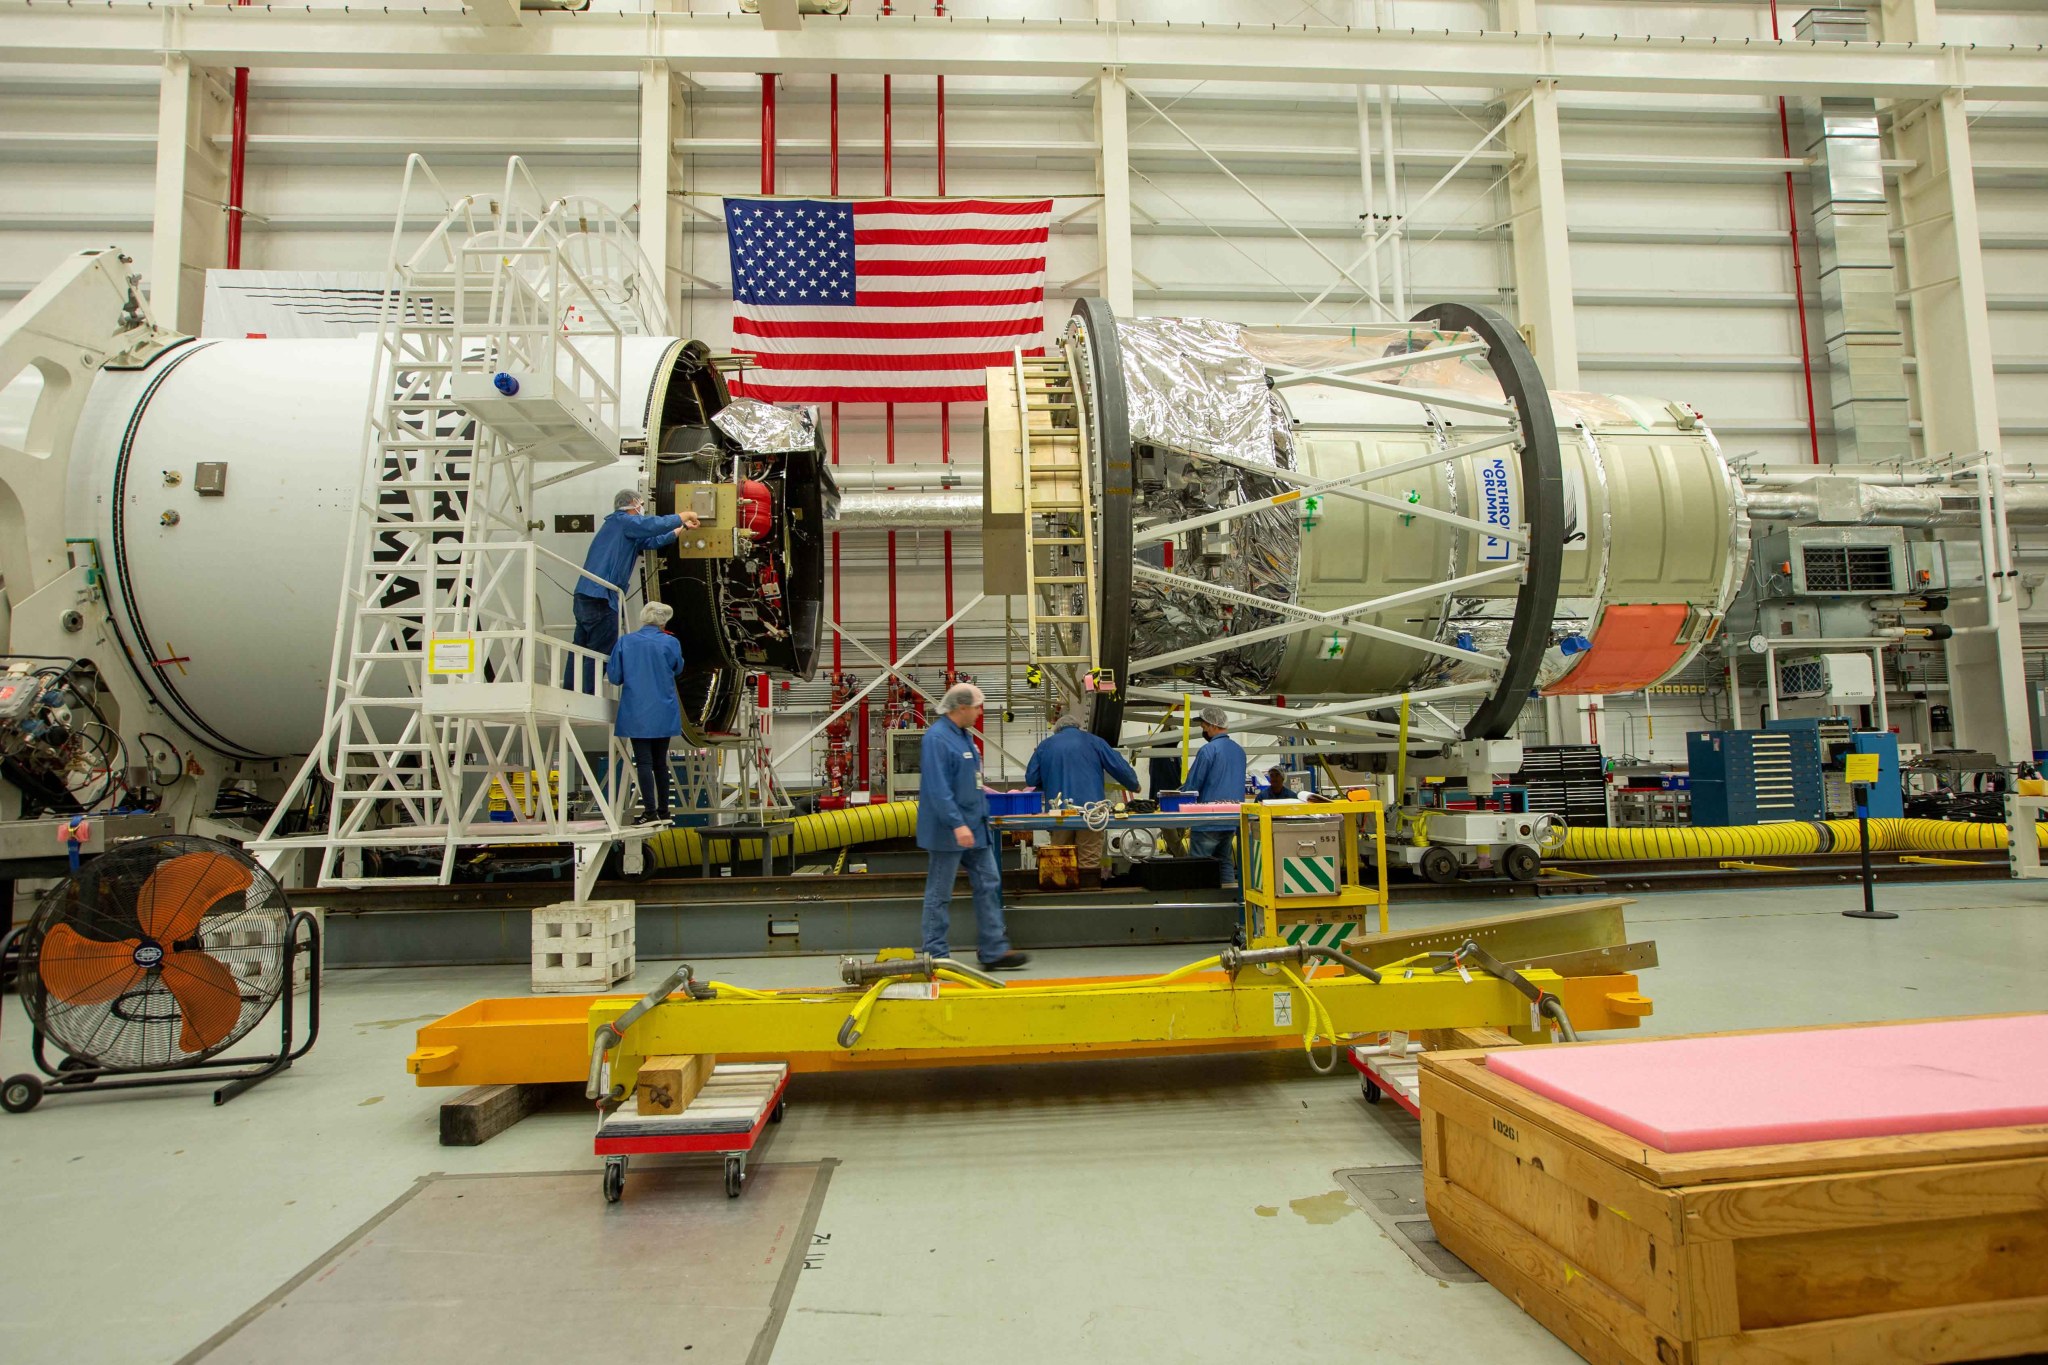 Northrop Grumman’s Antares rocket is mated with the Cygnus spacecraft in preparation for it’s Aug. 10 launch from NASA’s Wallops Flight Facility in Virginia.